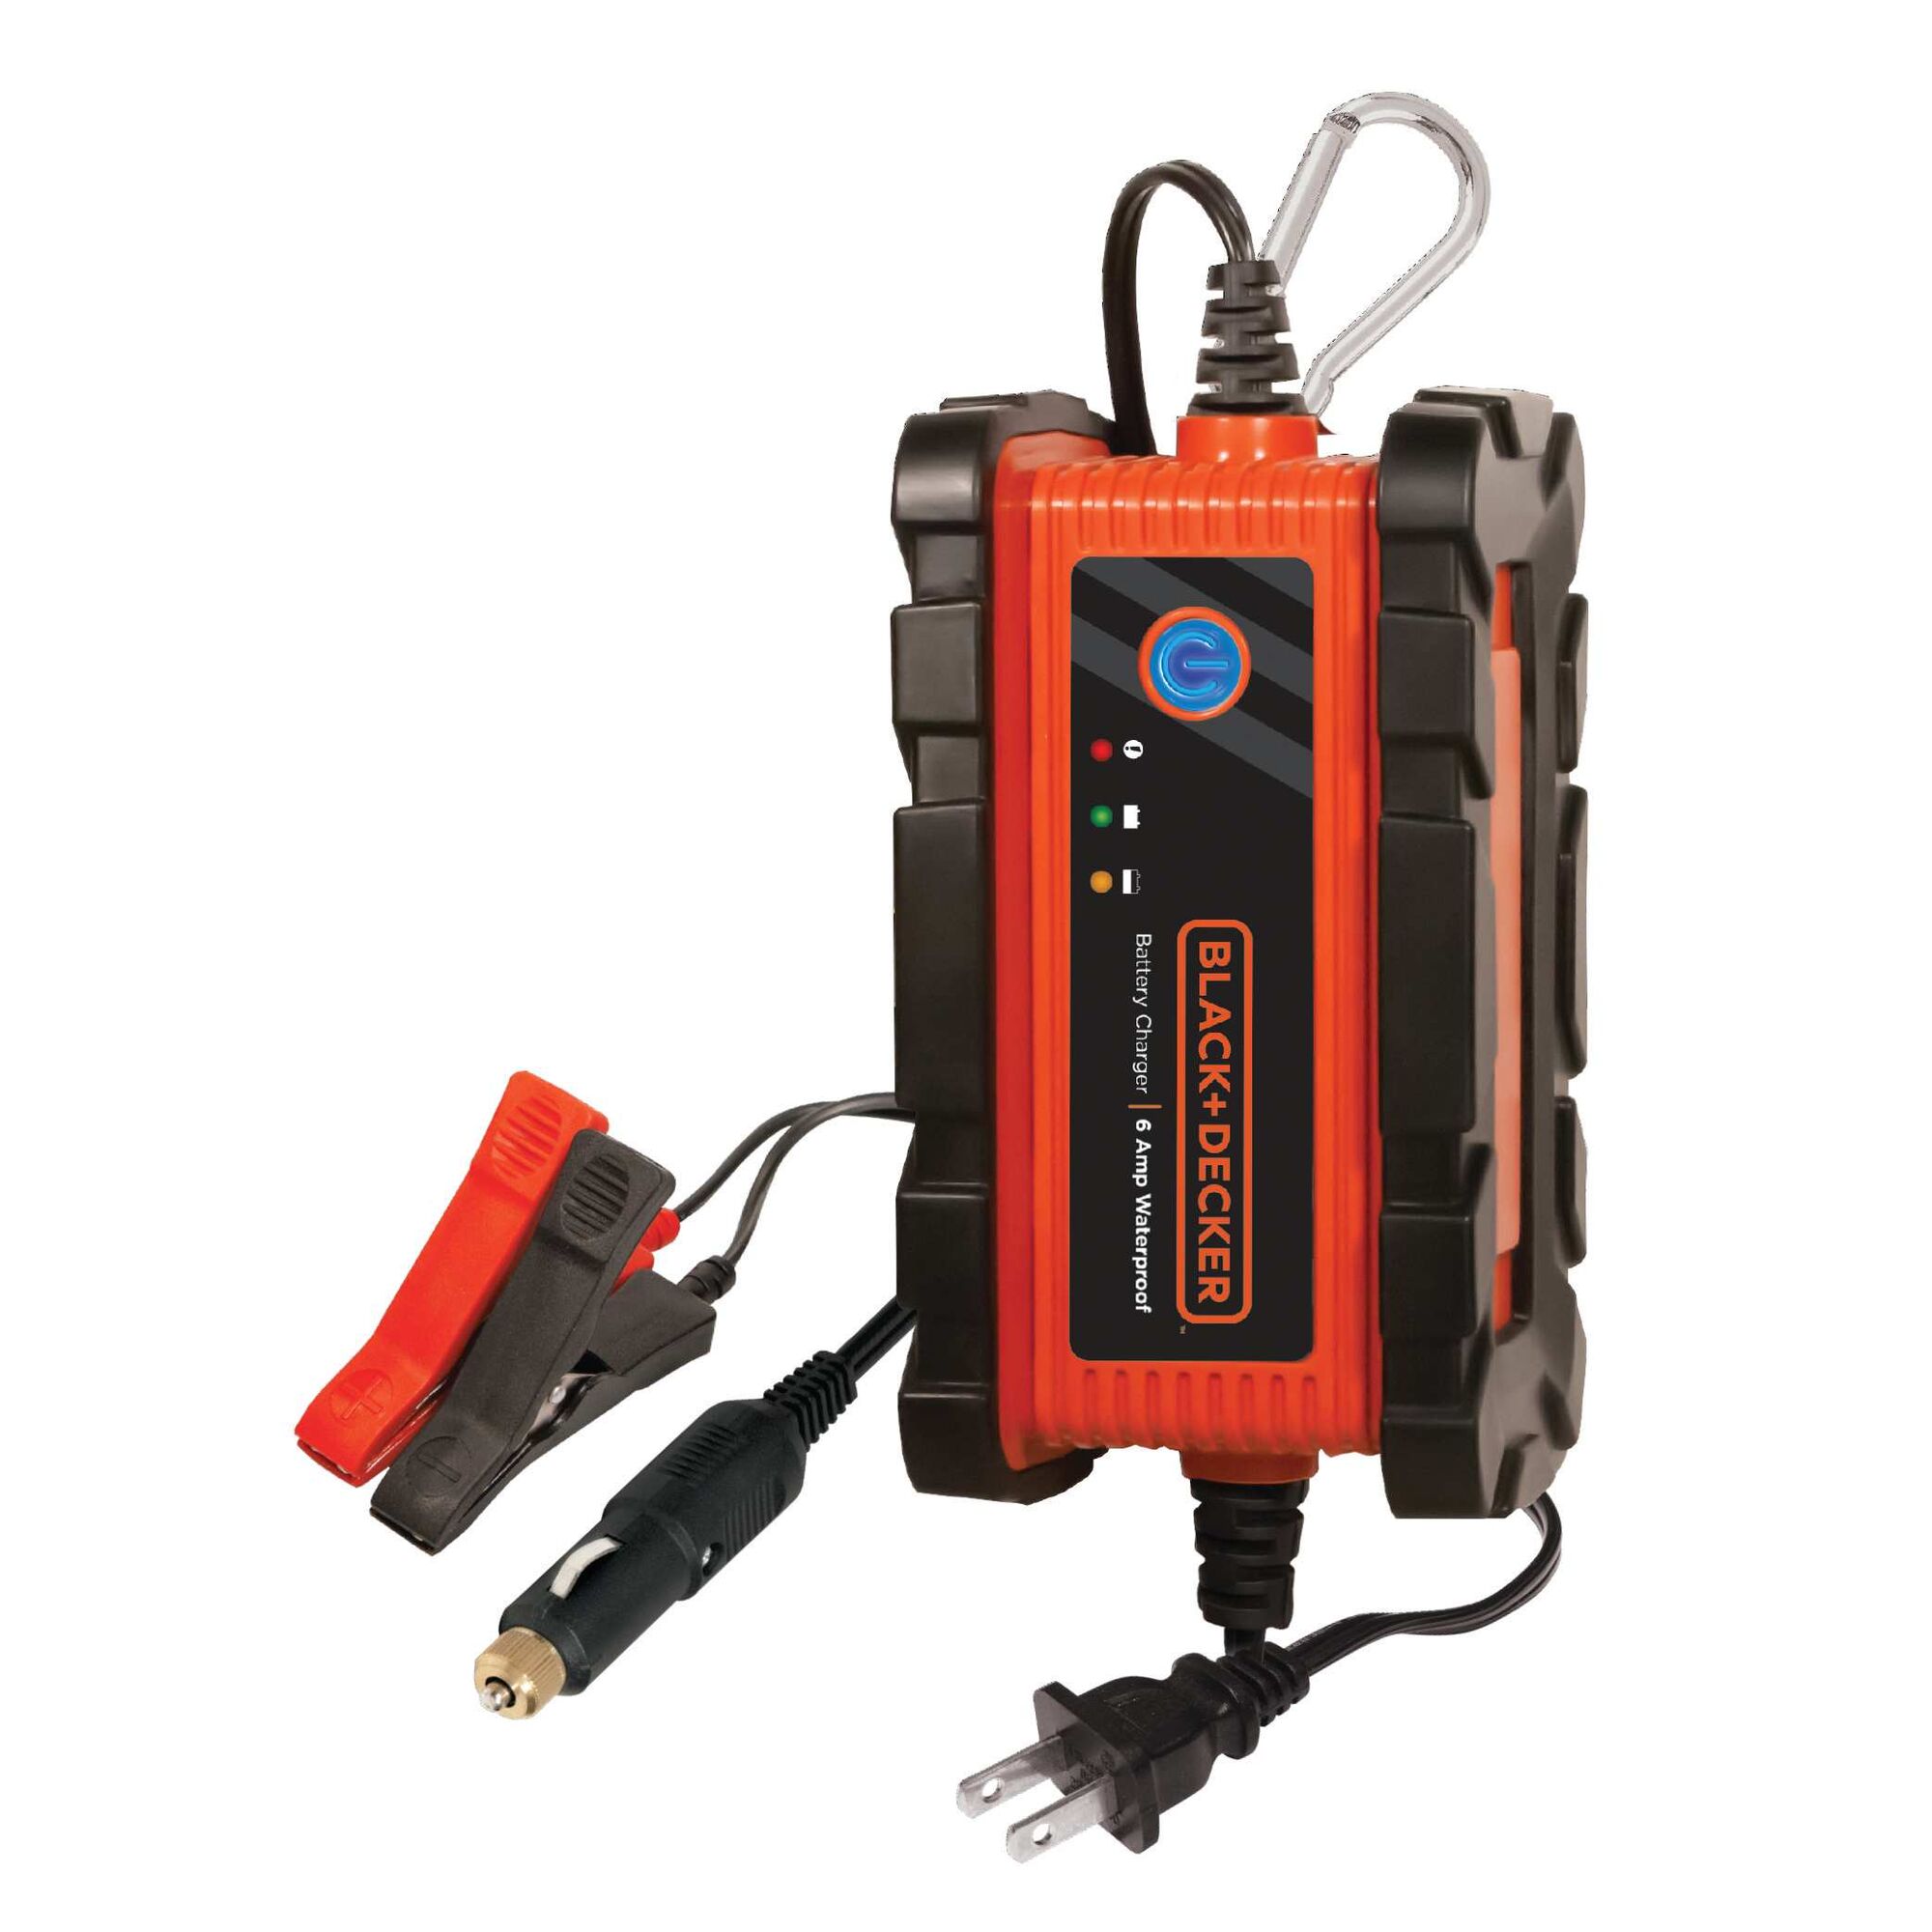 Black and decker fully automatic 2 Amp 12 volt waterproof battery charger.